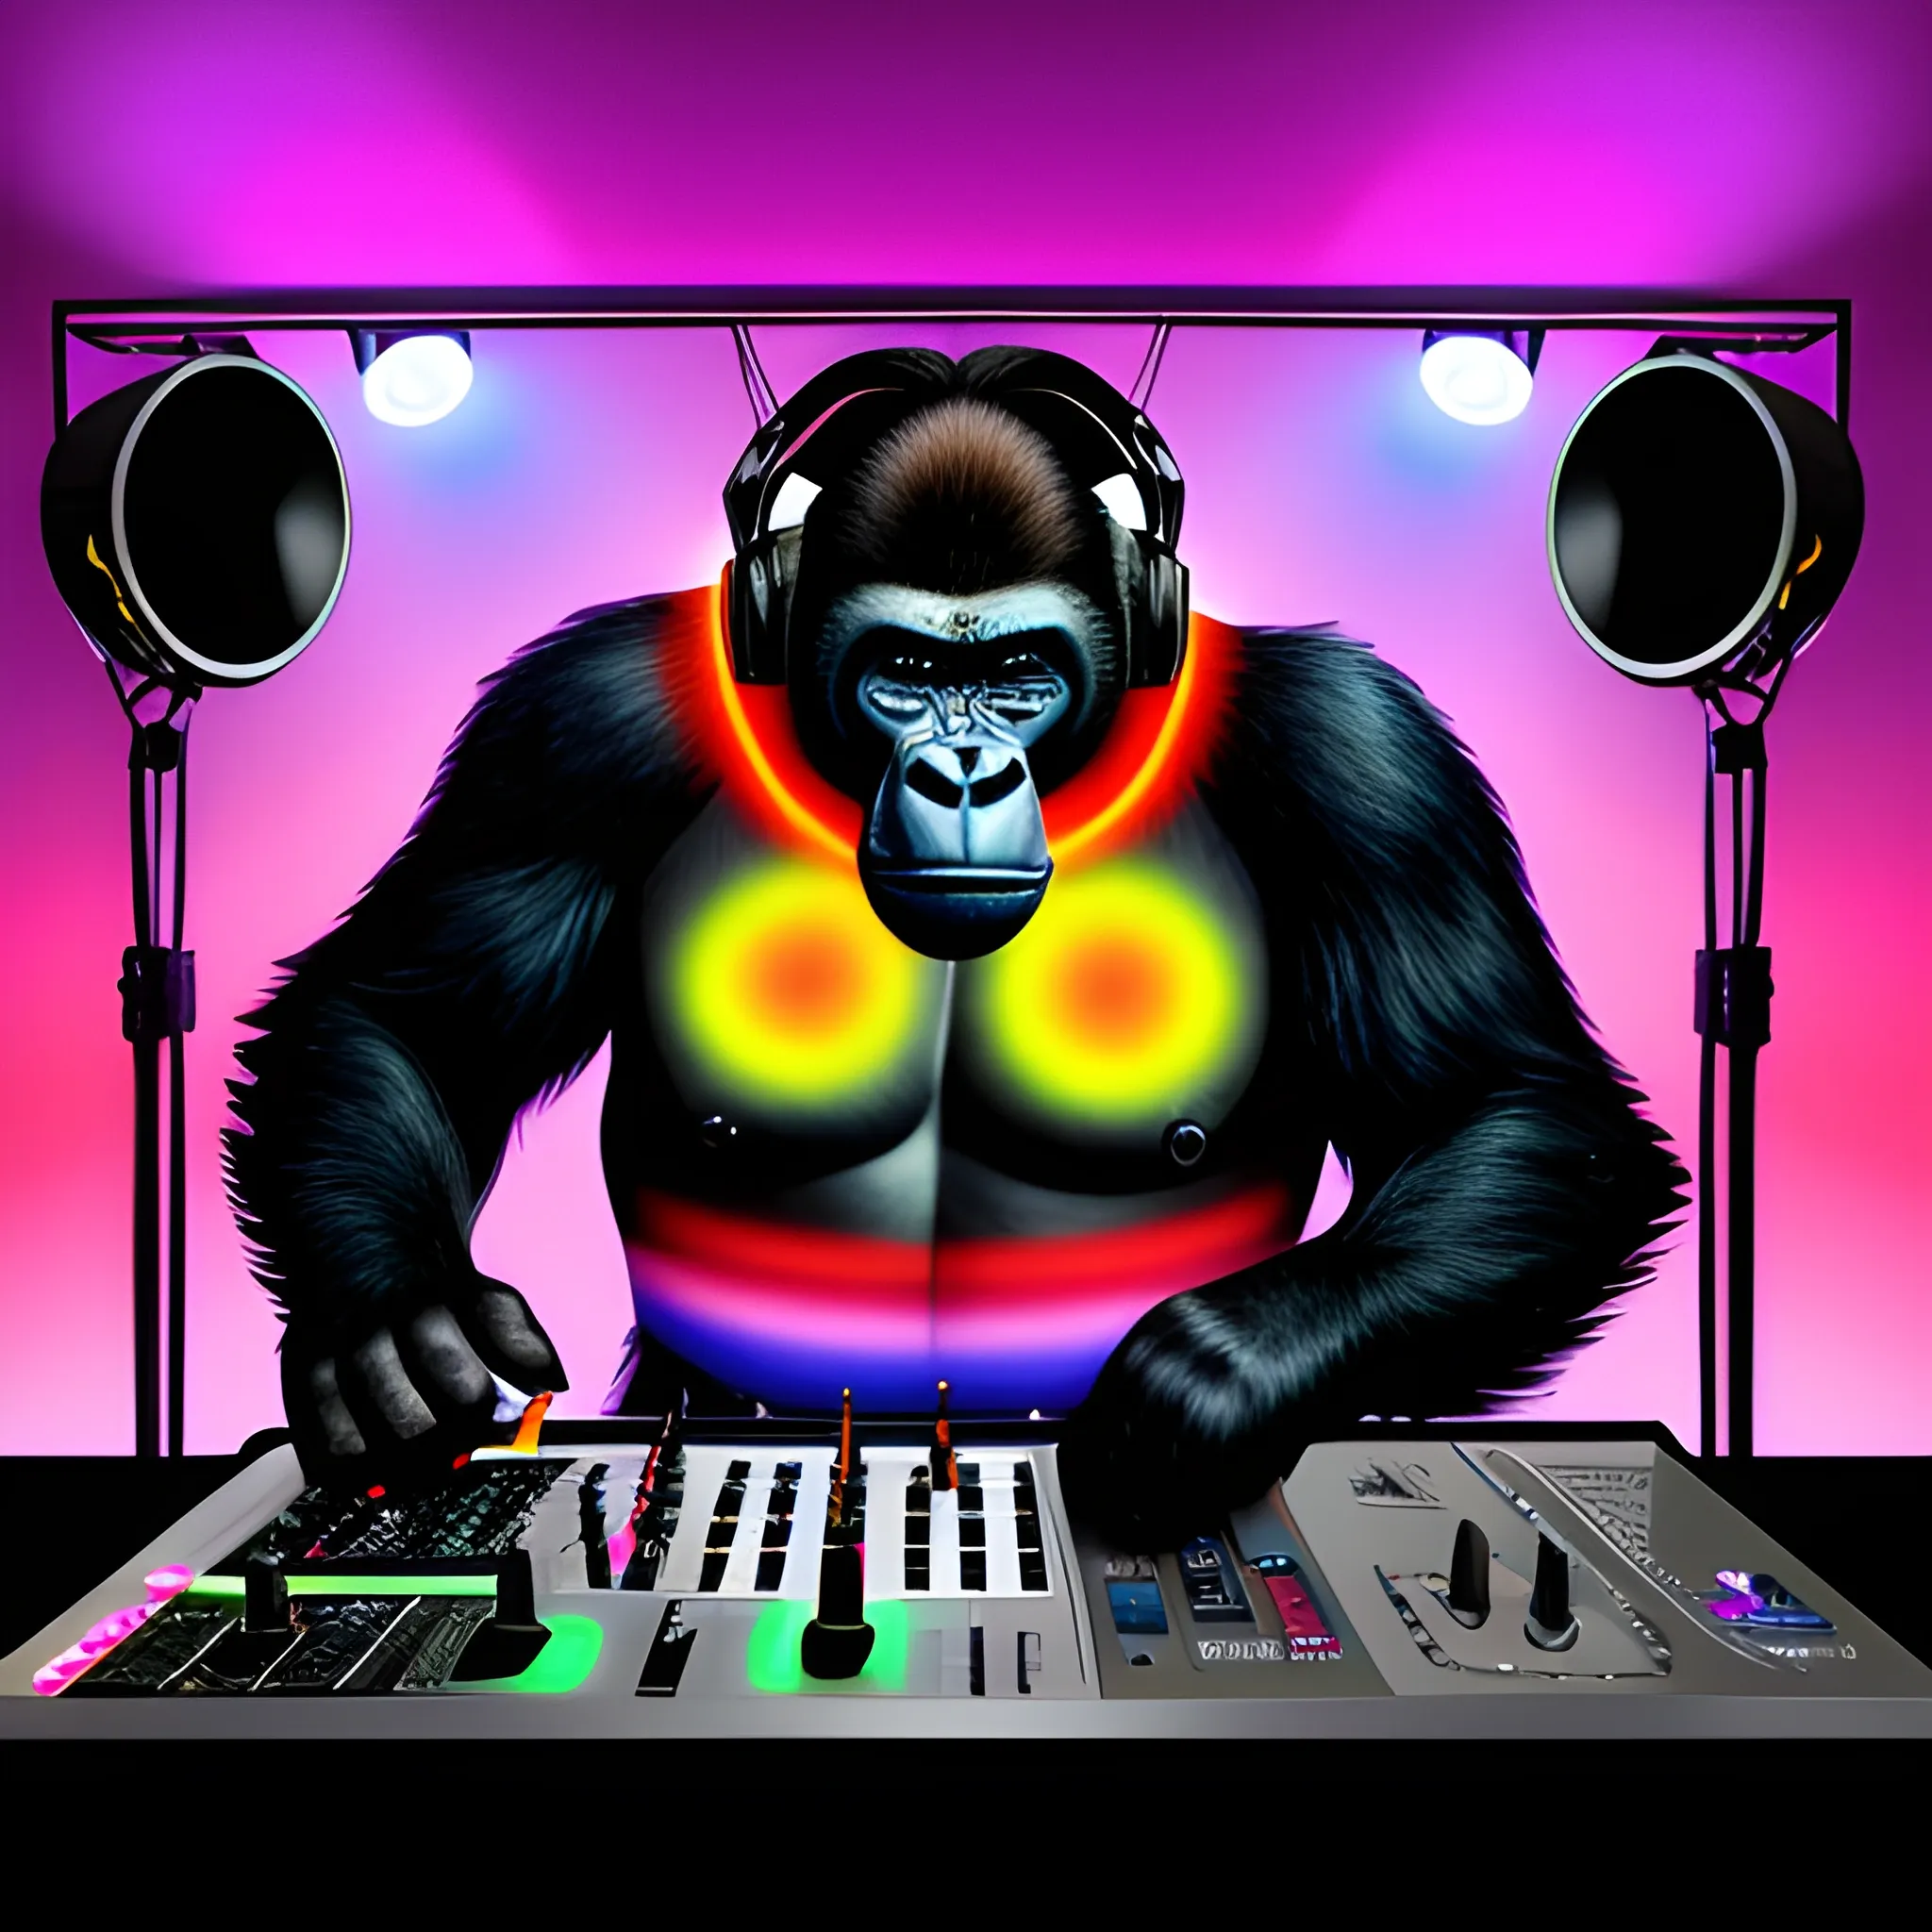 Gorilla dj speaking into the microphone behind the table with black cloth written "FEA USP", runway full of people, set of speakers playing, colorful lights, Cartoon